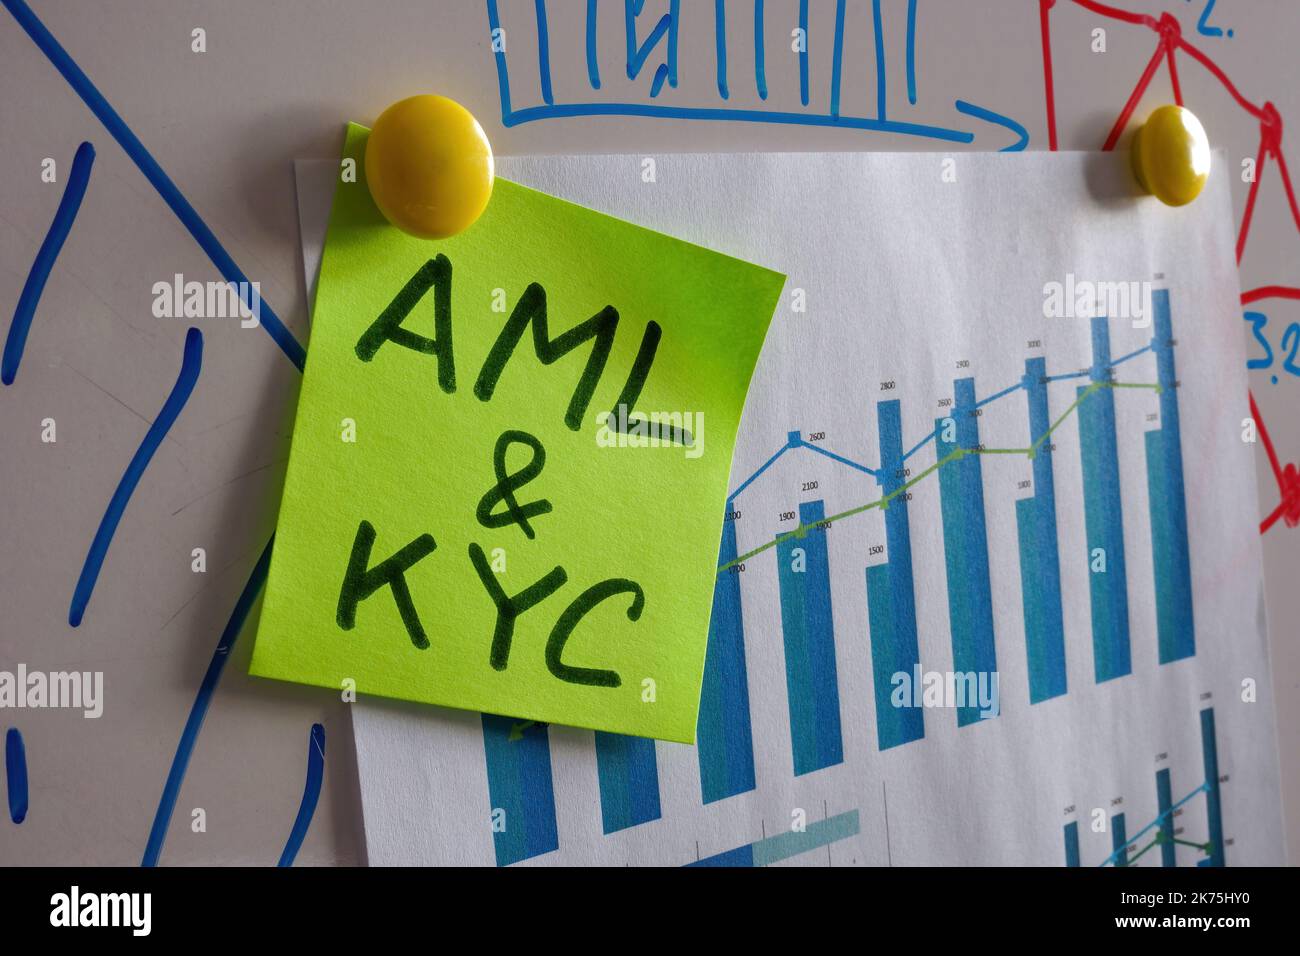 AML and KYC sticker on the whiteboard with financial data. Stock Photo